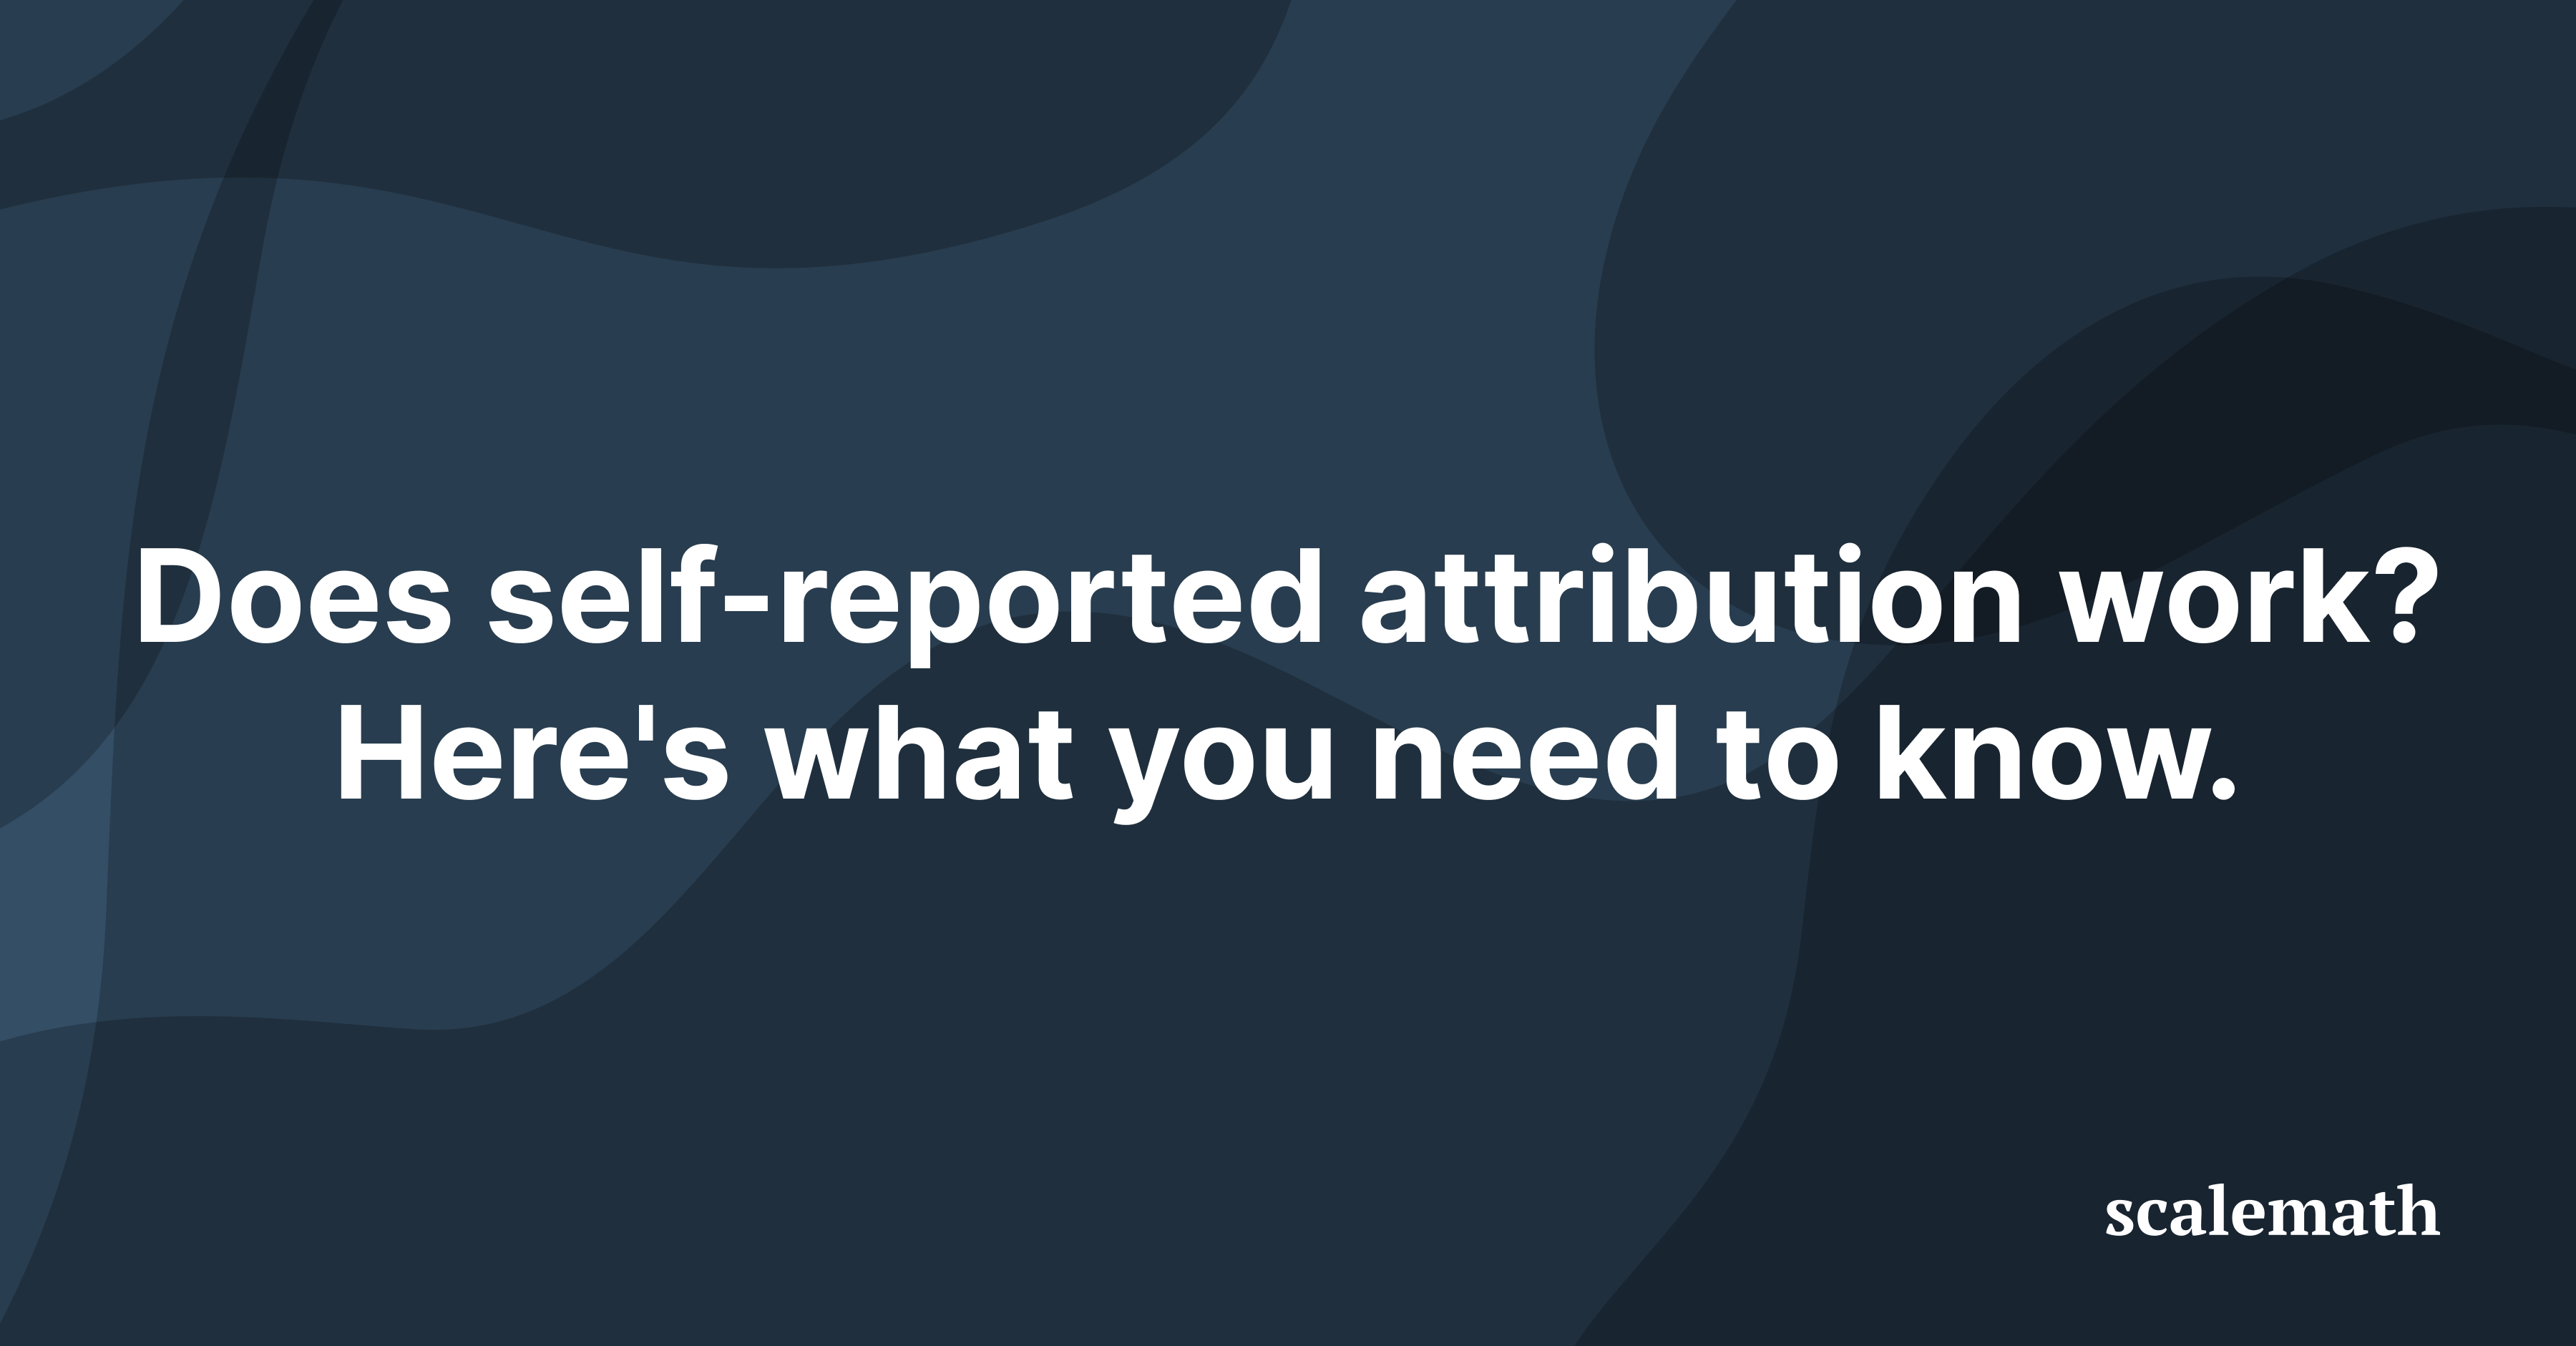 Does self-reported attribution work? Here’s what you need to know.